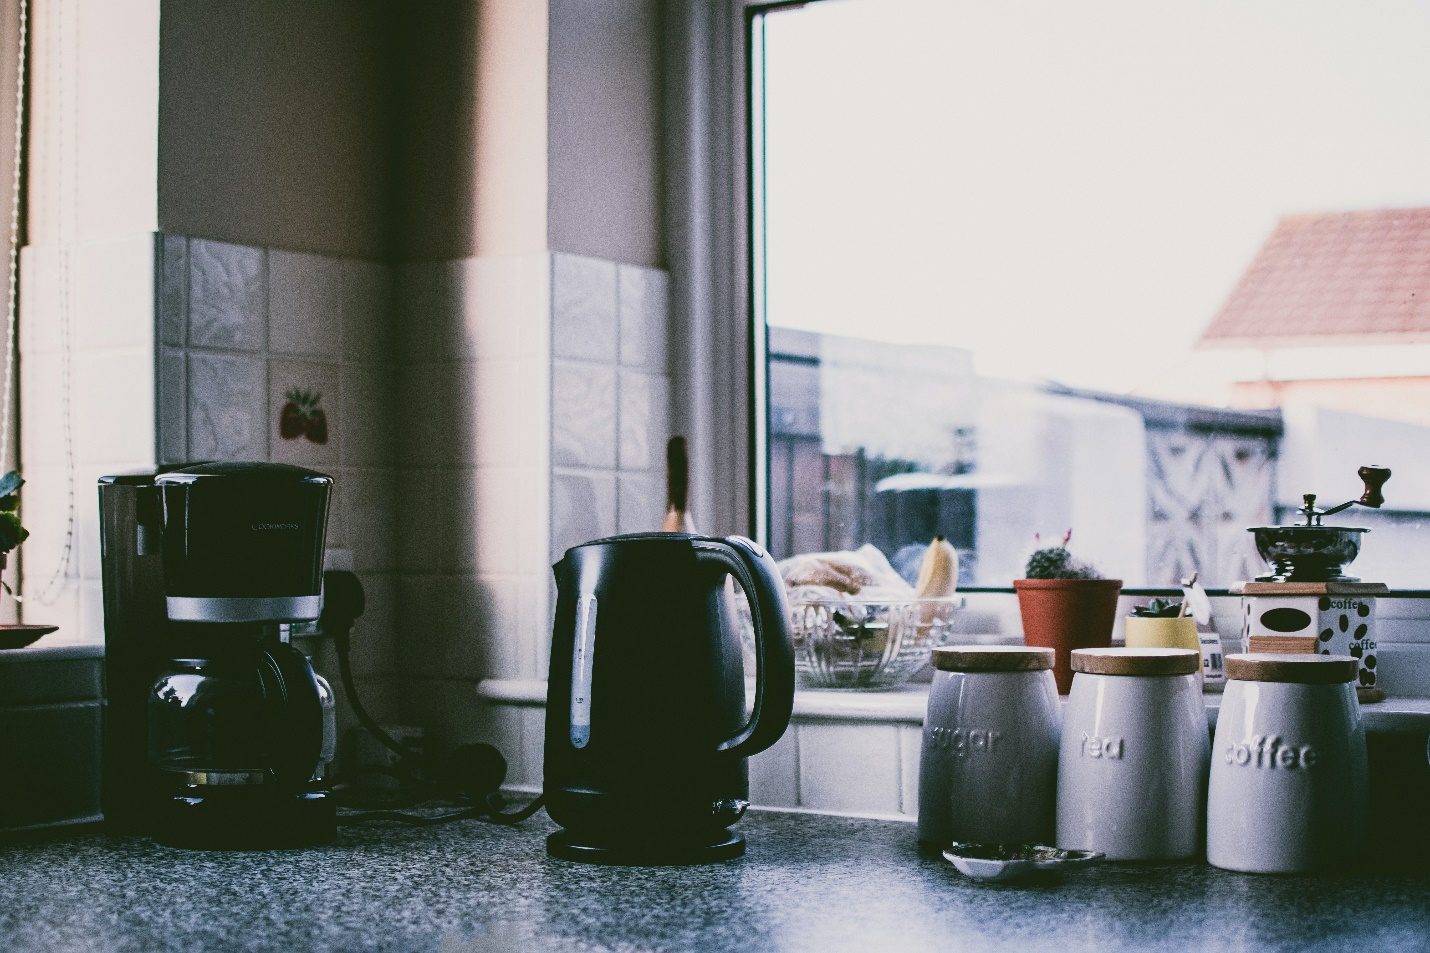 A quartz kitchen top with a coffee pot, electric kettle, and some jars.